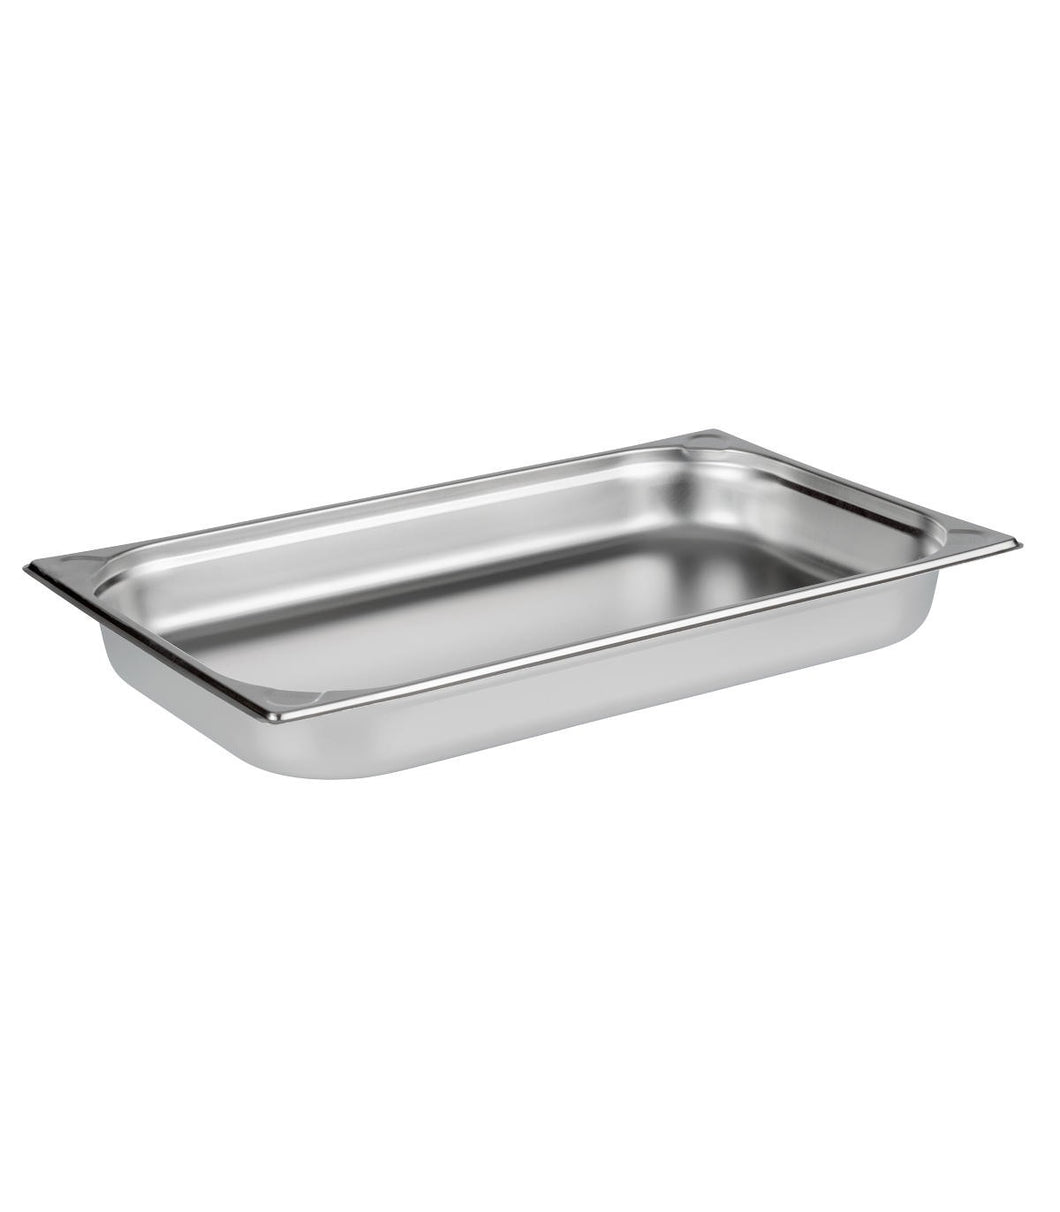 Stainless Steel Matte Finish GN Pan 1/1 20MM (0.75 Inches), NSF, Gastronorm Pan